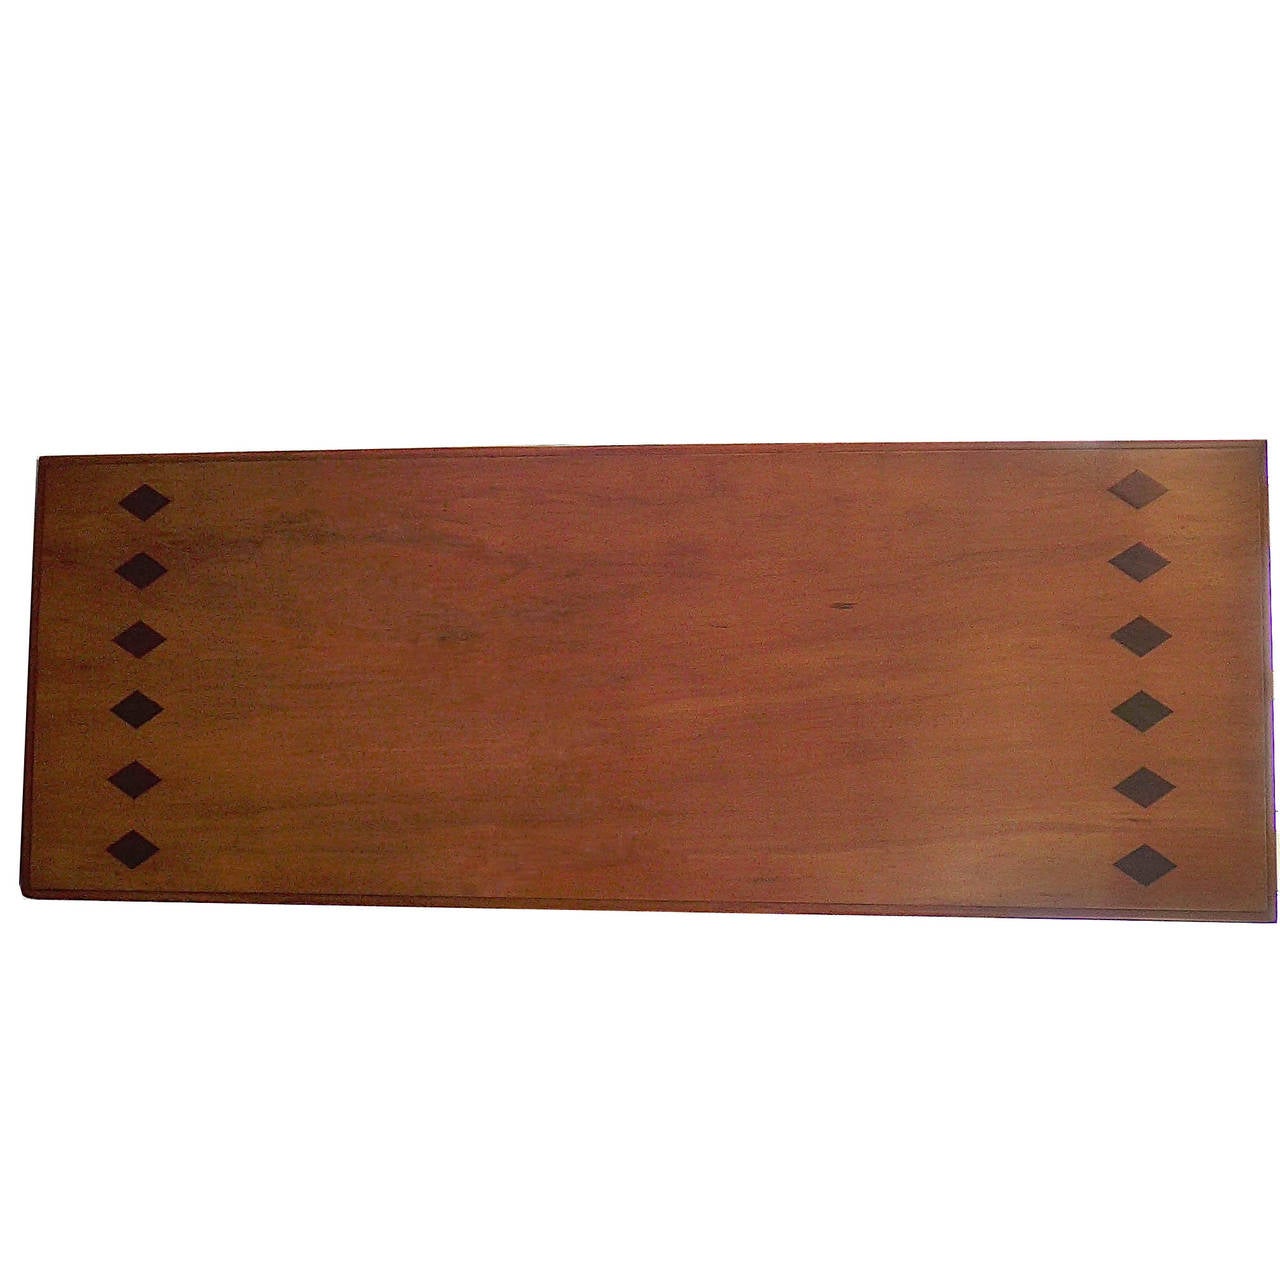 Other  Rare Original Handmade Table by William Spratling For Sale